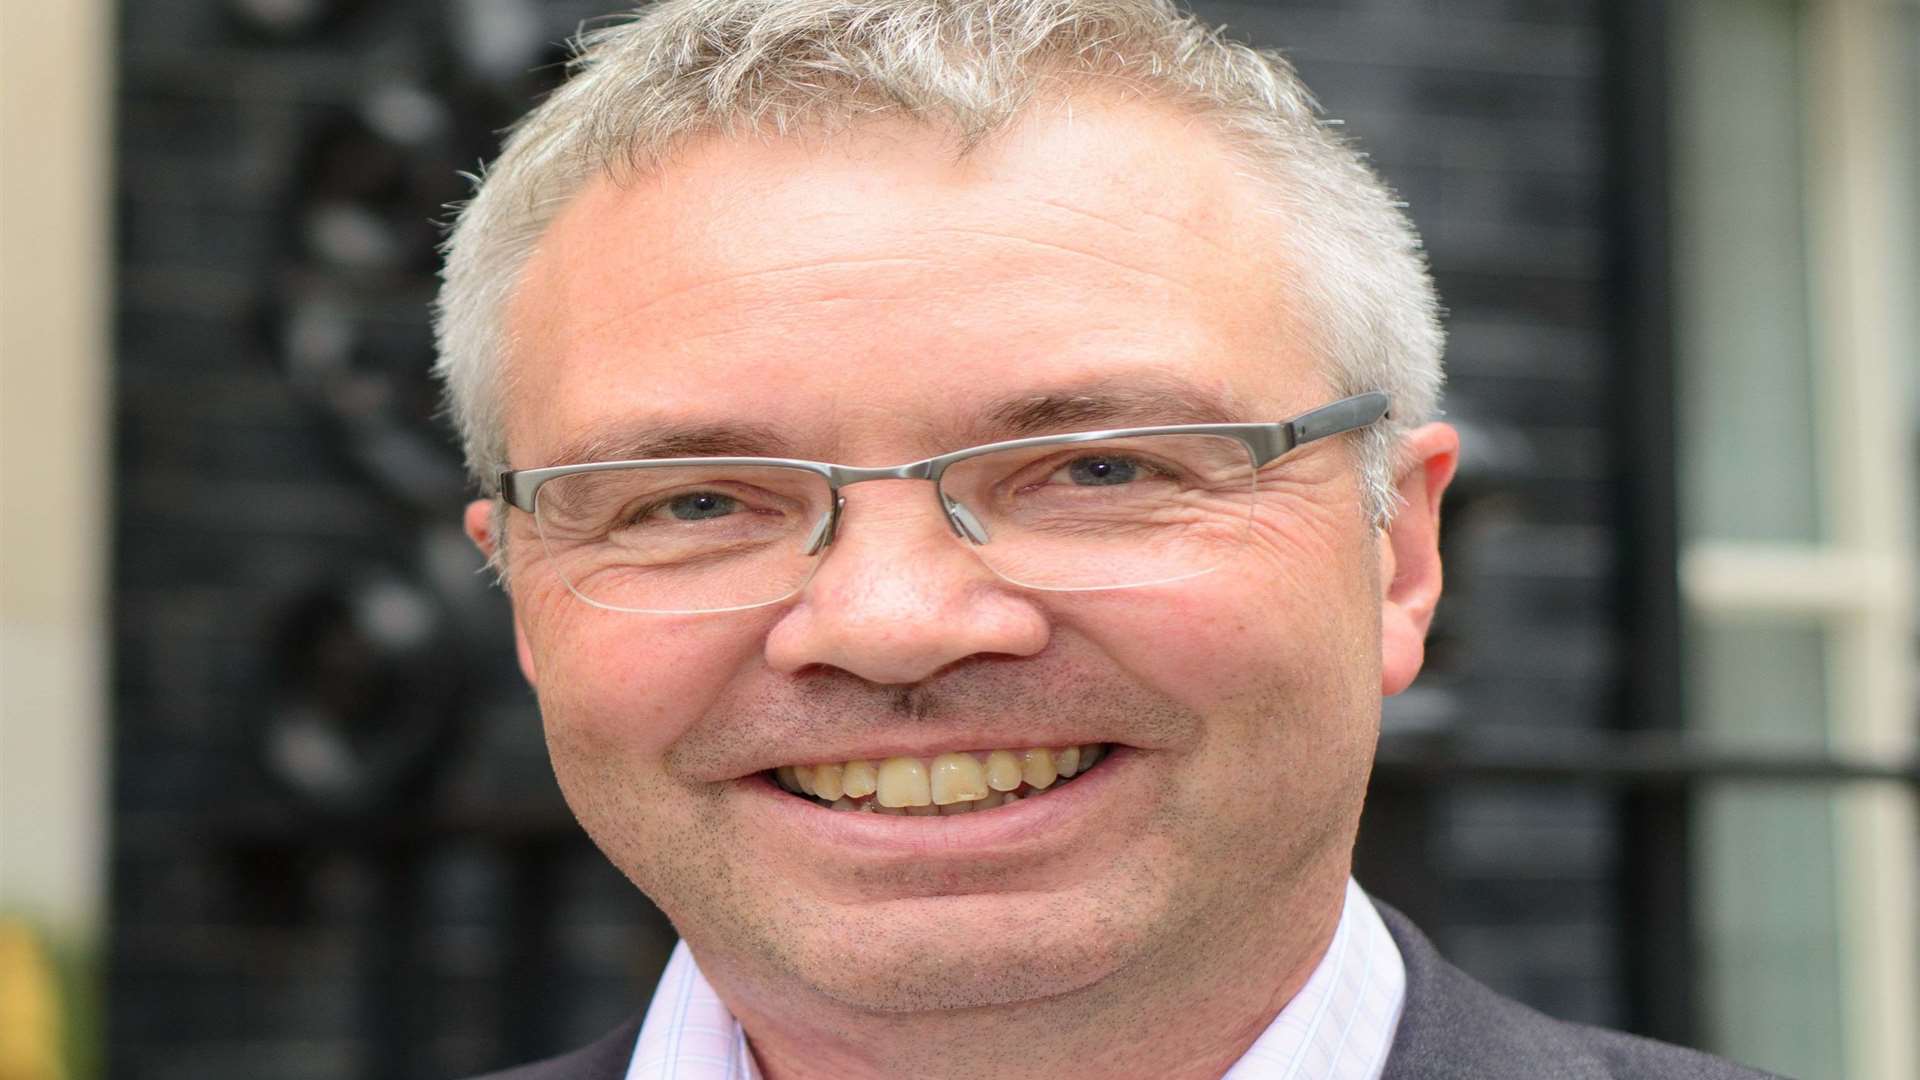 Peter Wanless, the NSPCC's chief executive